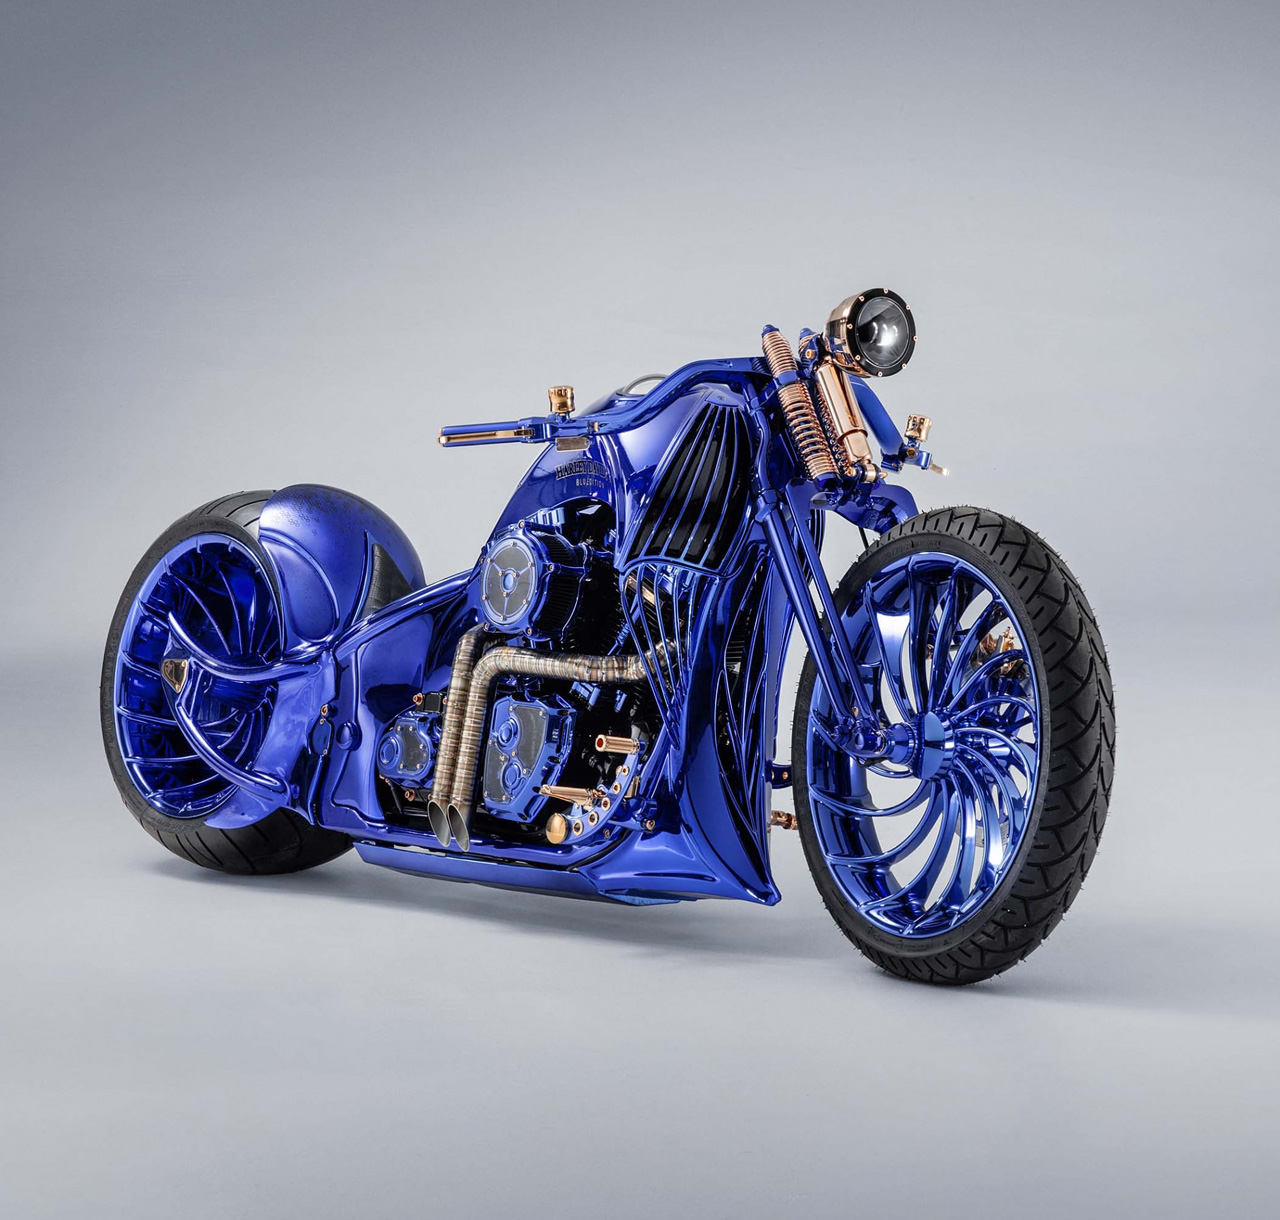 the most costliest bike in the world